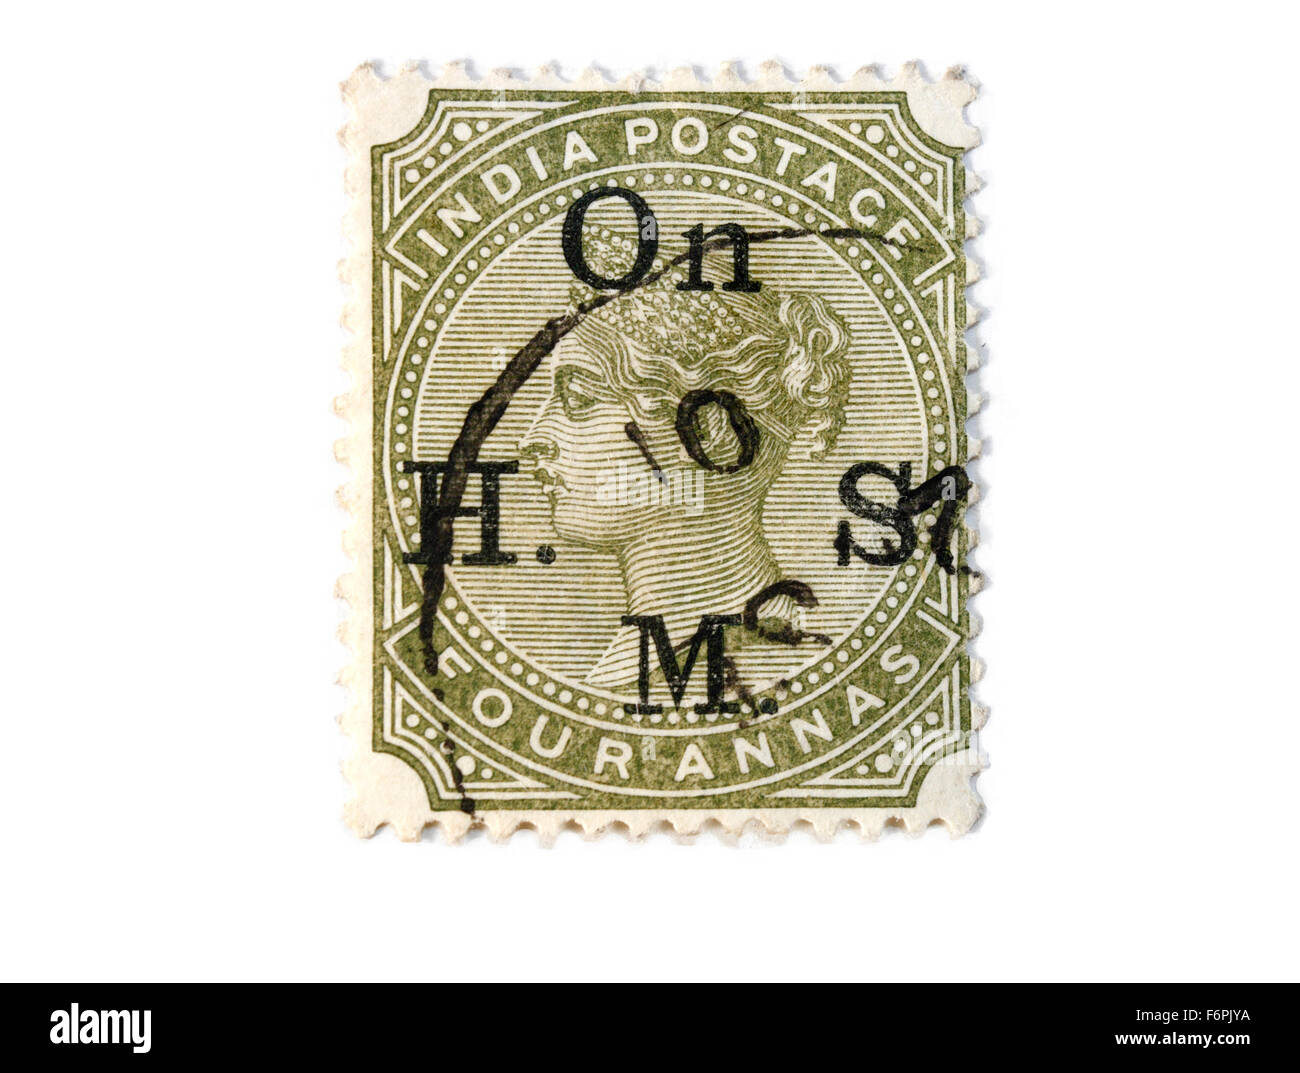 Queen Victoria India Postage Stamp. On her majesty's service post mark. stamp collecting. British Empire Stock Photo